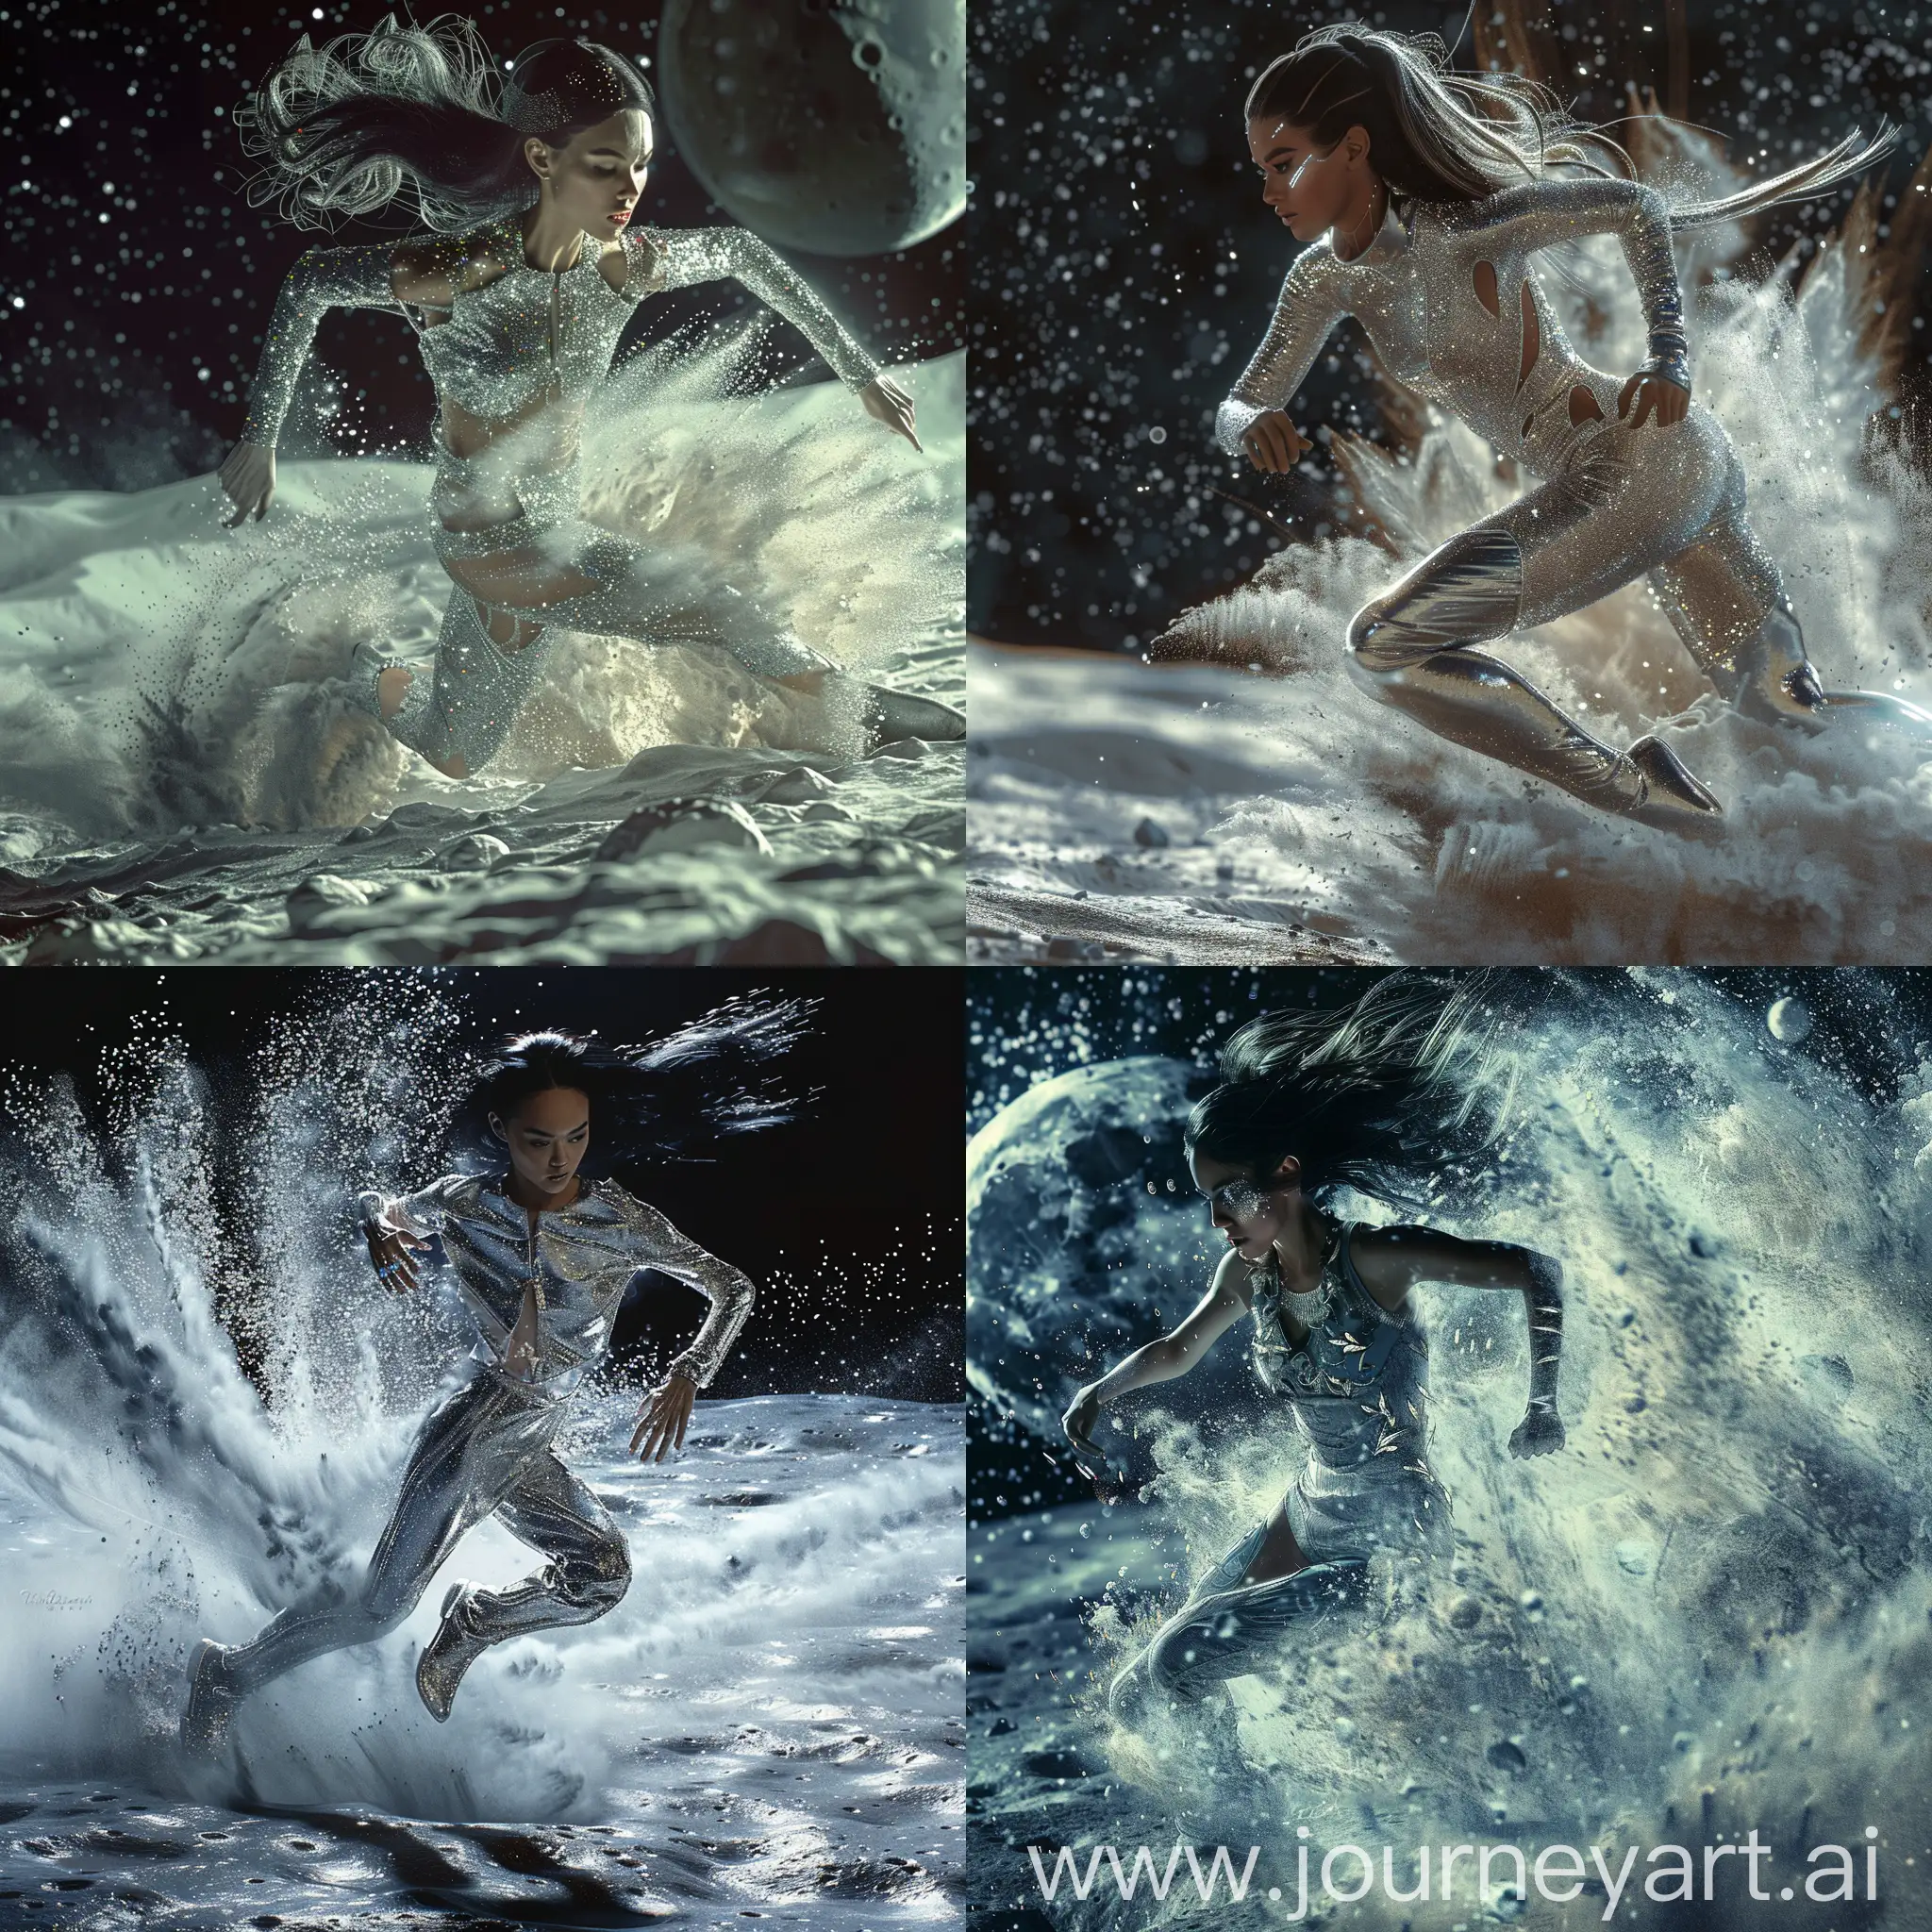 A beautiful futuristic otherworldly girl running on the moon creating a storm of dust behind her. She has dark hair, glittering shimmering skin and is wearing a silver outfit. Beautiful magical mysterious fantasy surreal highly detailed